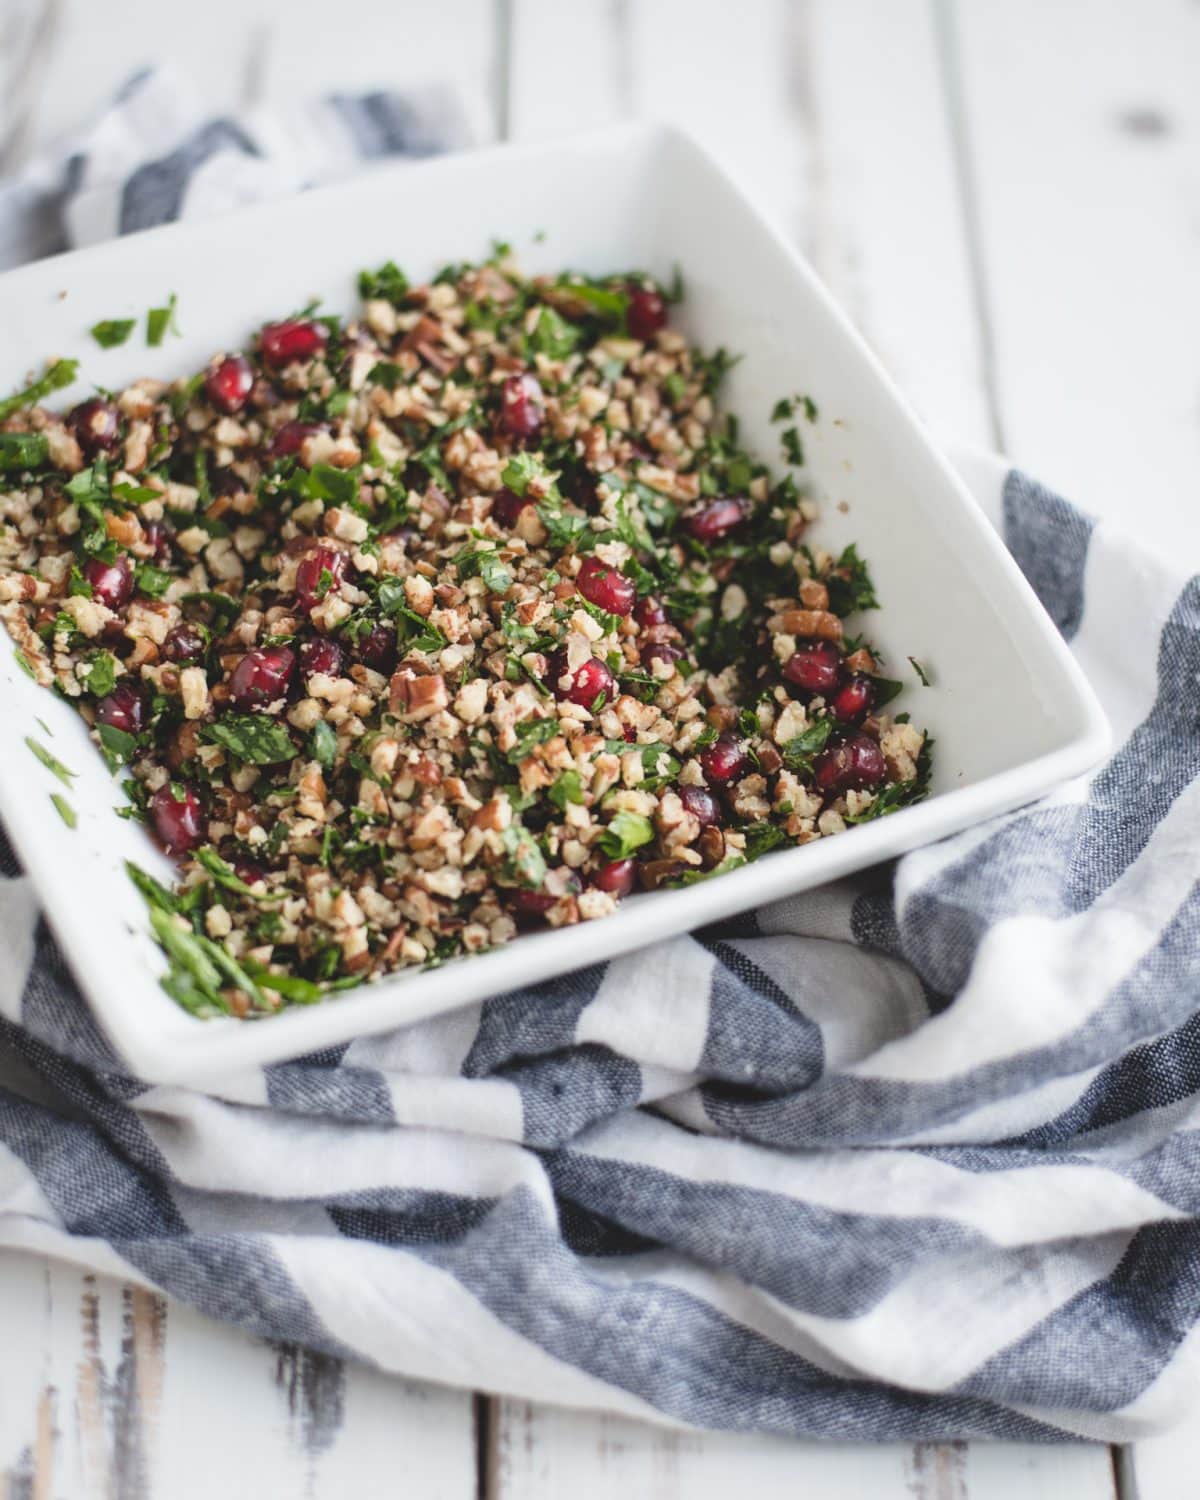 Tossed pomegranate, parsley, and crushed pecans in a bowl